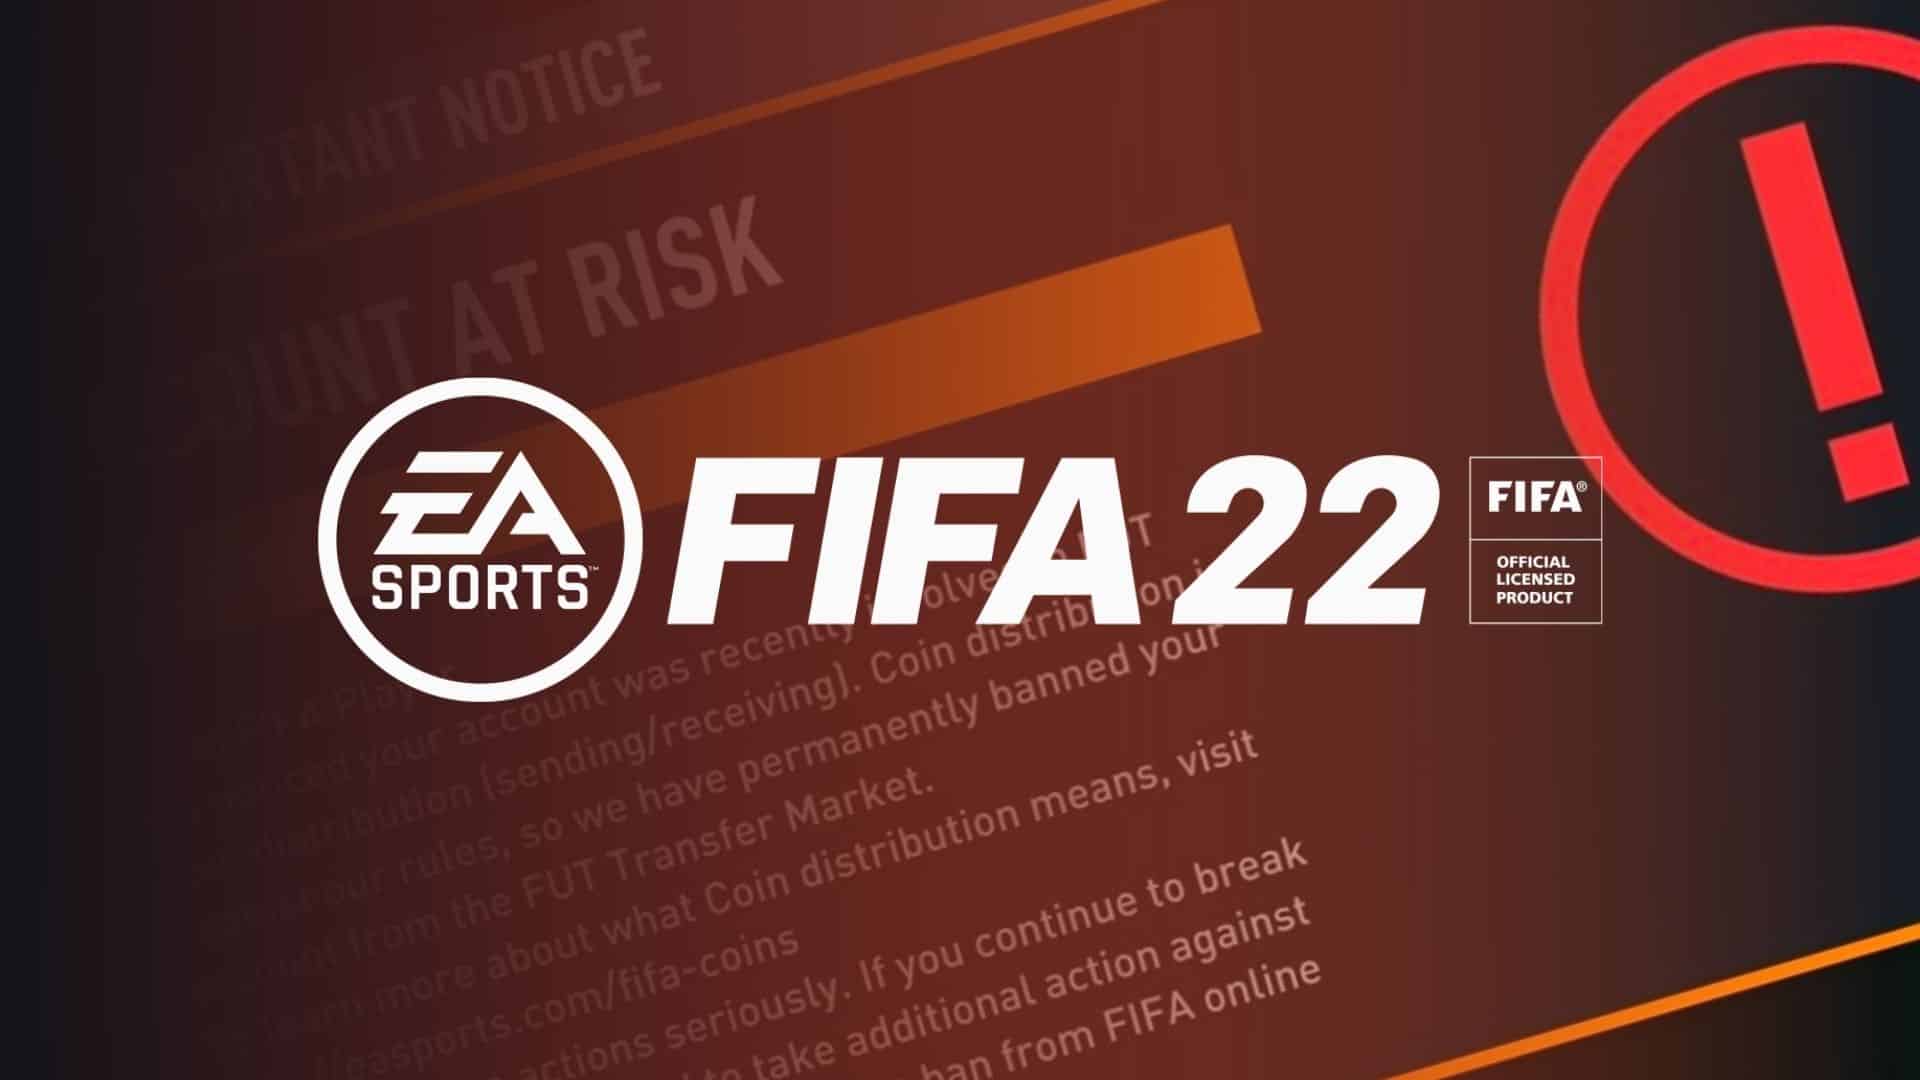 fifa 22 account bans on ultimate team